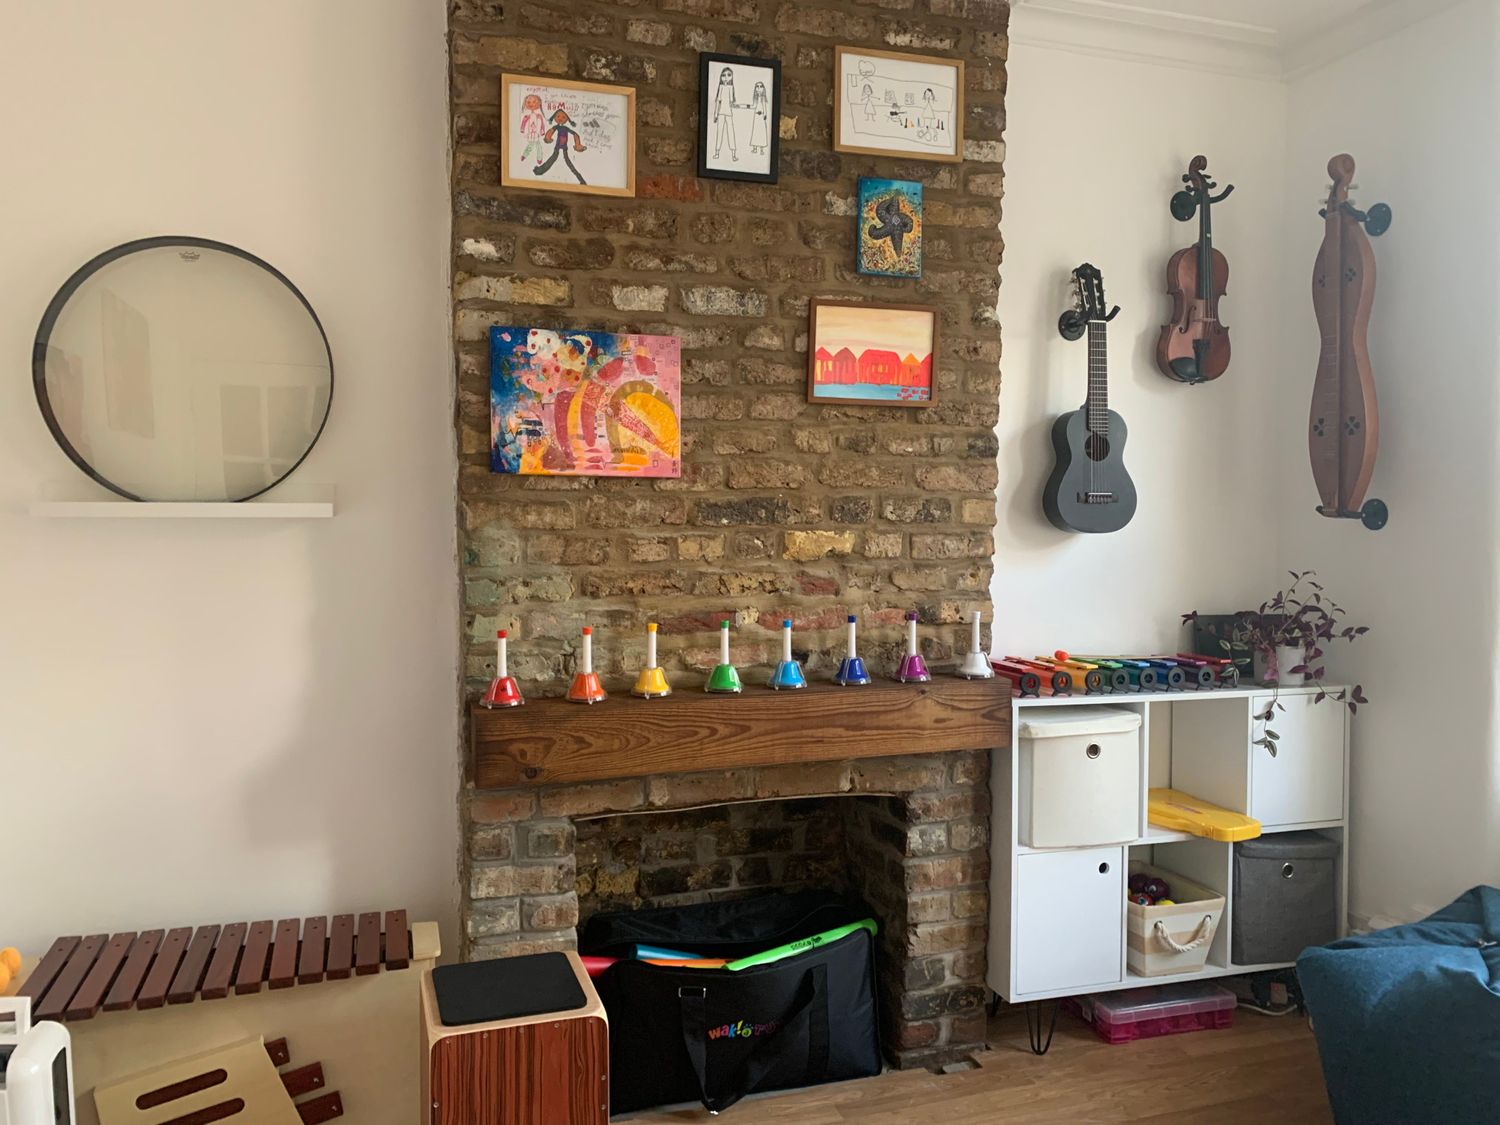 Gallery Photo of The therapy room is equipped with musical instruments and painting materials so clients can choose their medium of expression.  